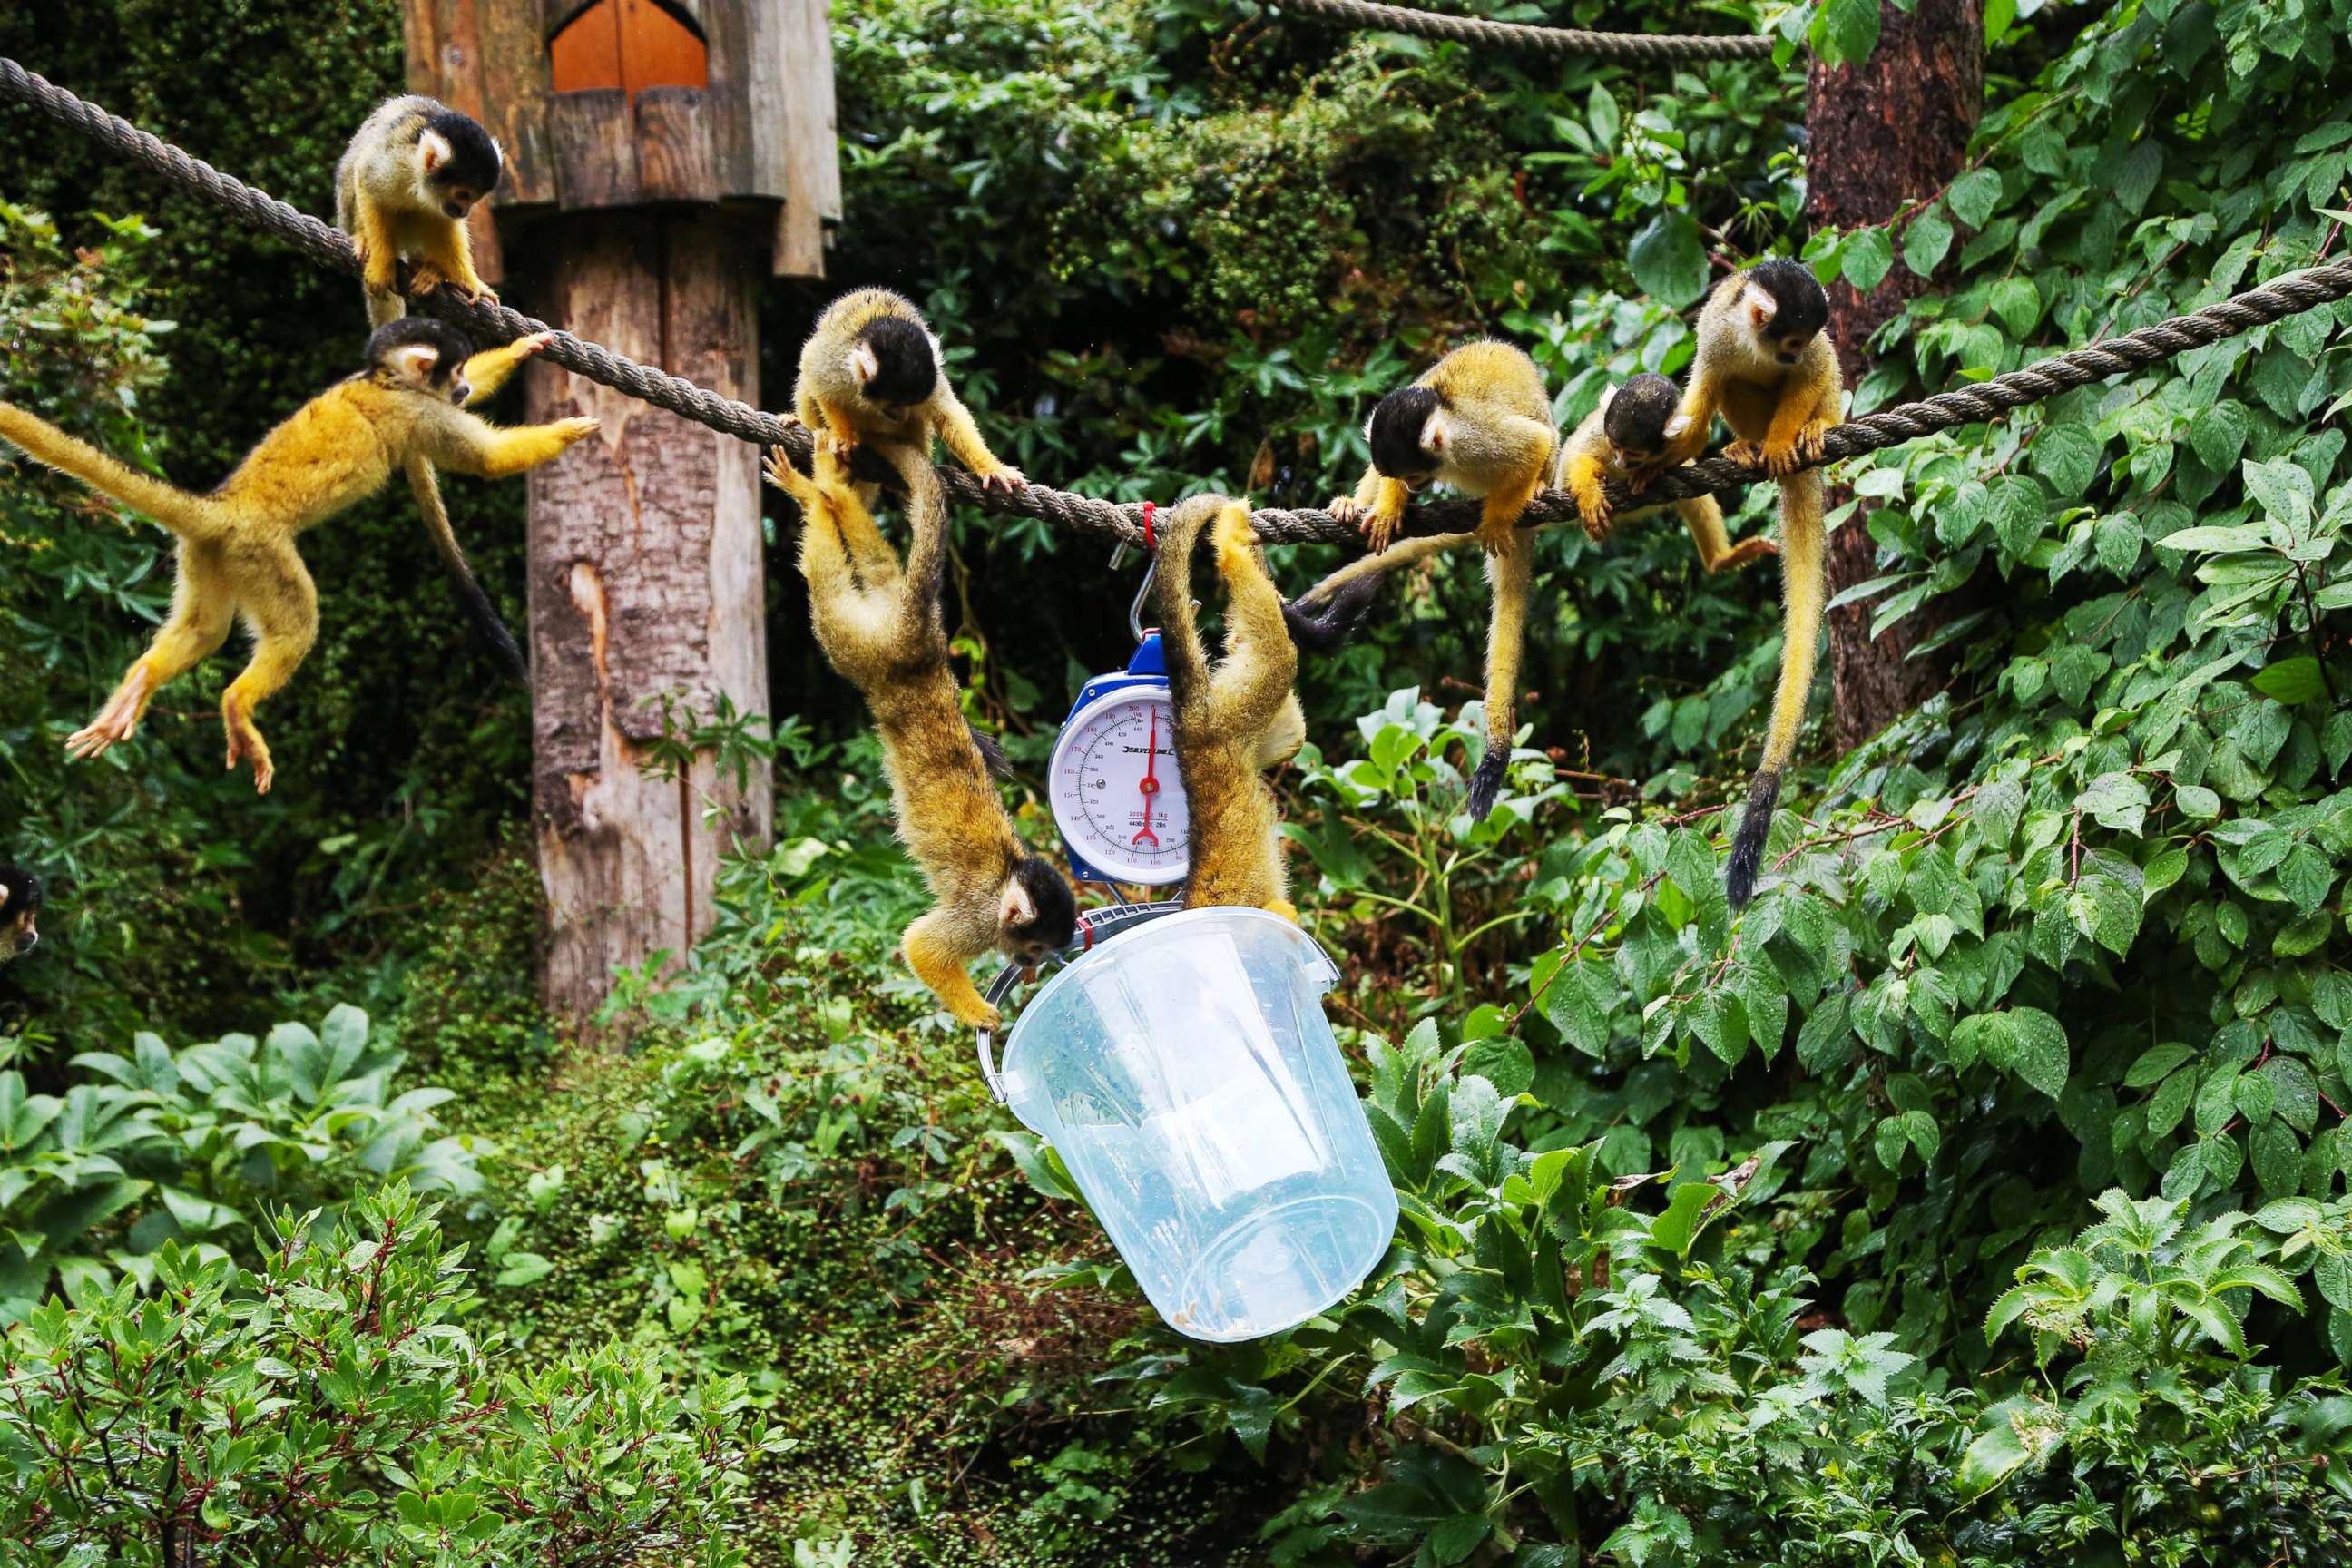 PHOTO: Squirrel Monkeys weighed during the annual weigh-in at  ZSL London Zoo, in London, Aug. 23, 2018.